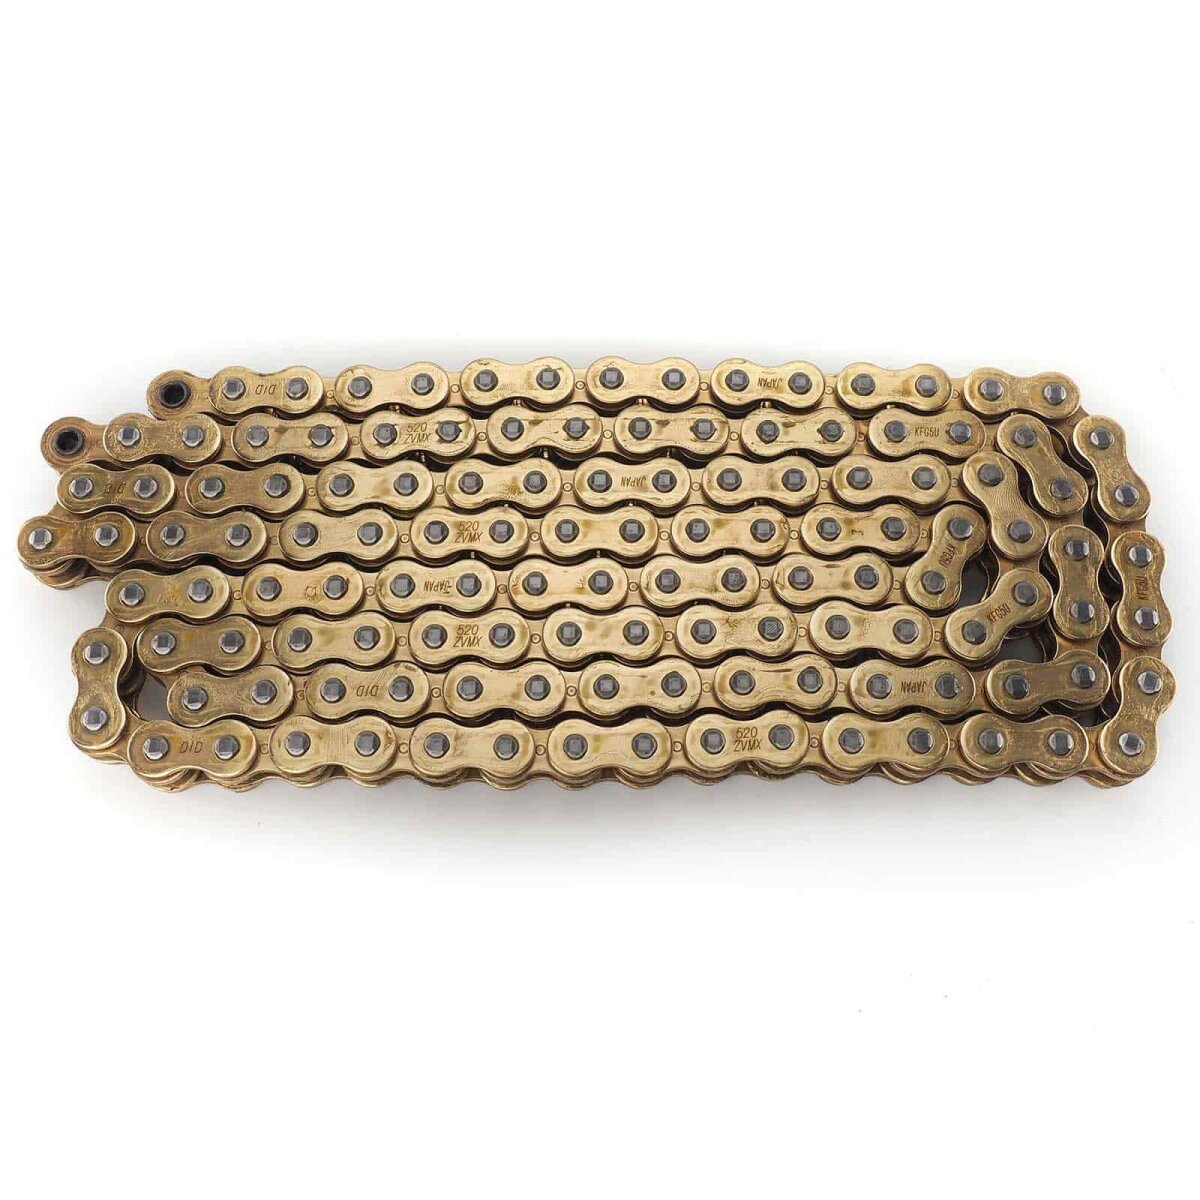 D.I.D X-ring chain G&G 520ZVMX/112 with rivet lock, 97,21 € for 